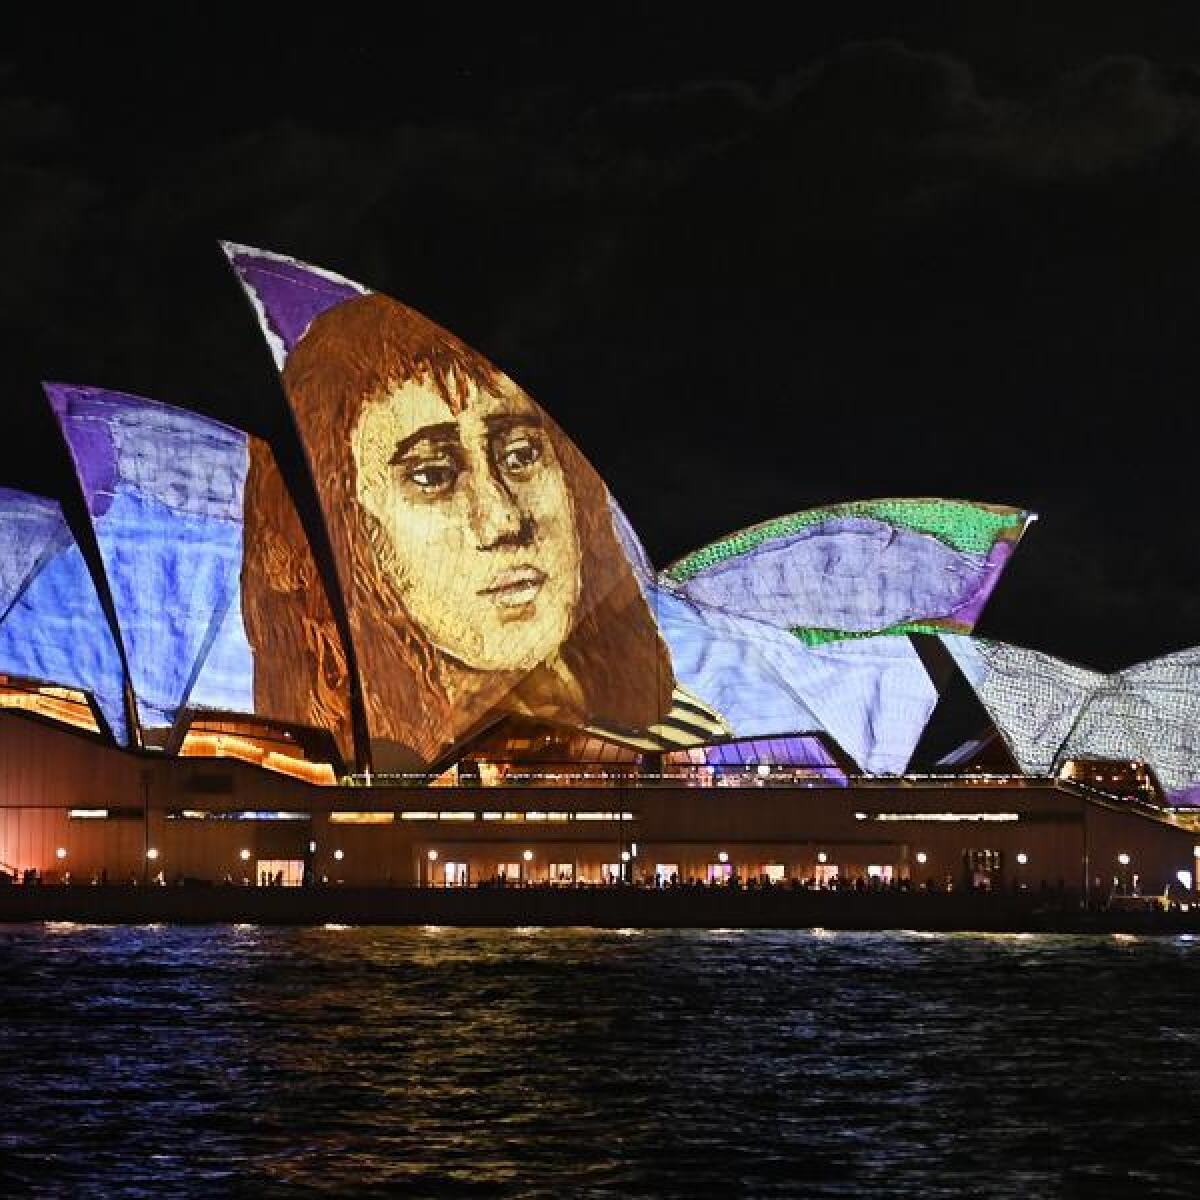 Sails of the Sydney Opera House illuminated with projections for Vivid